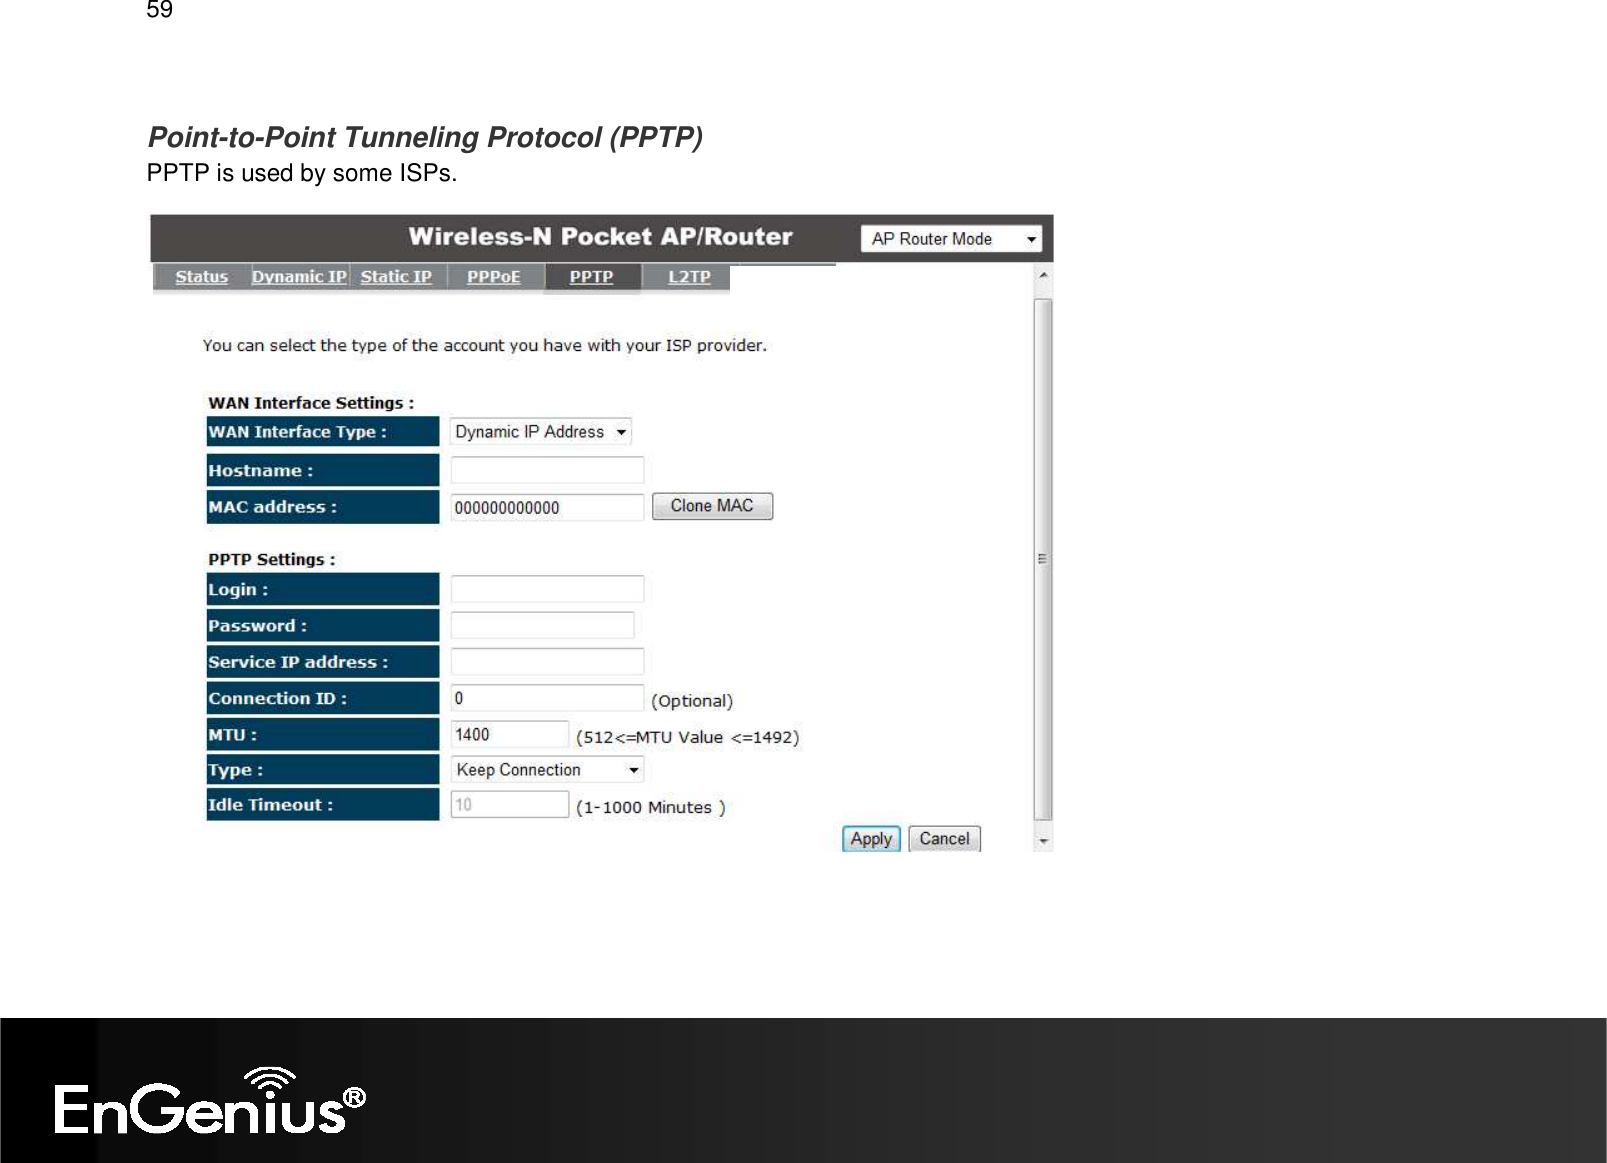   59  Point-to-Point Tunneling Protocol (PPTP) PPTP is used by some ISPs.    